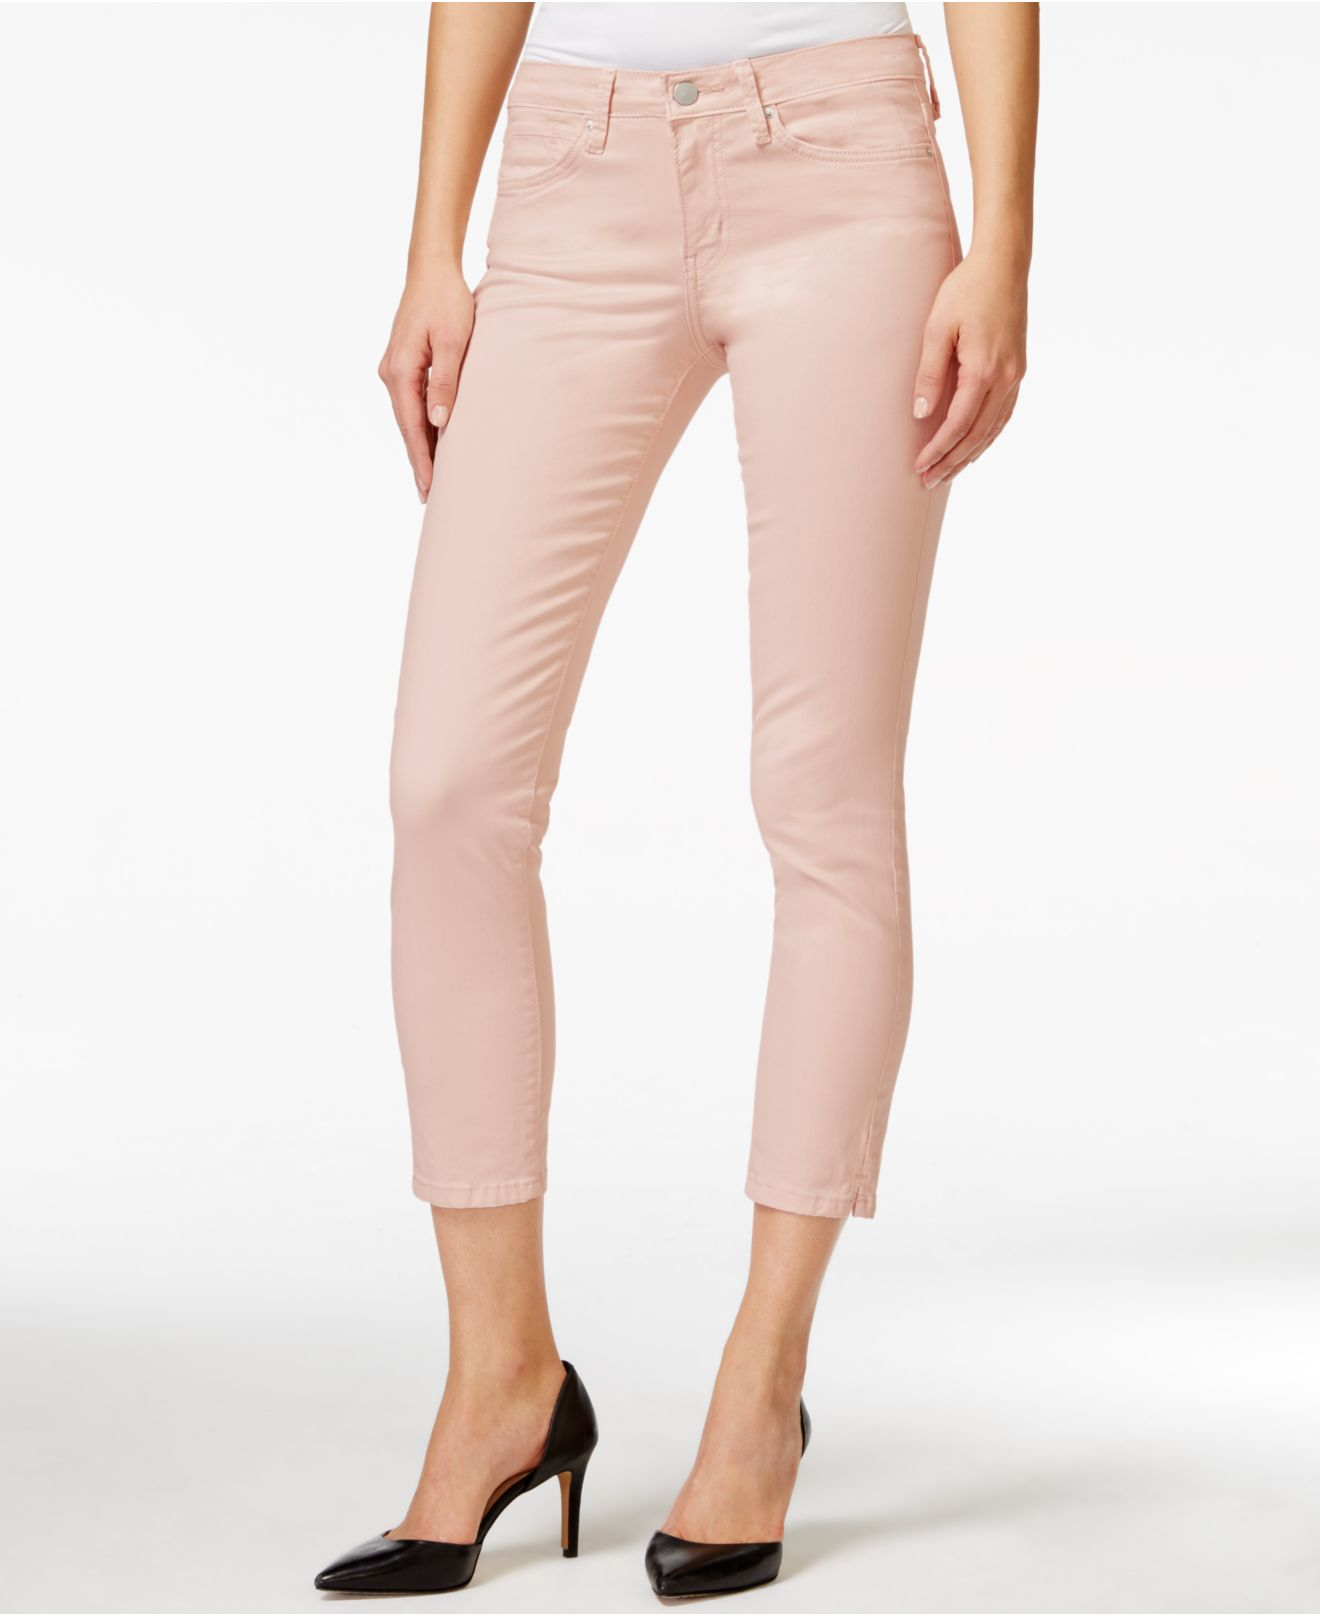 Calvin Klein Cropped Skinny Colored Wash Jeans in Pale Blush (Pink) - Lyst